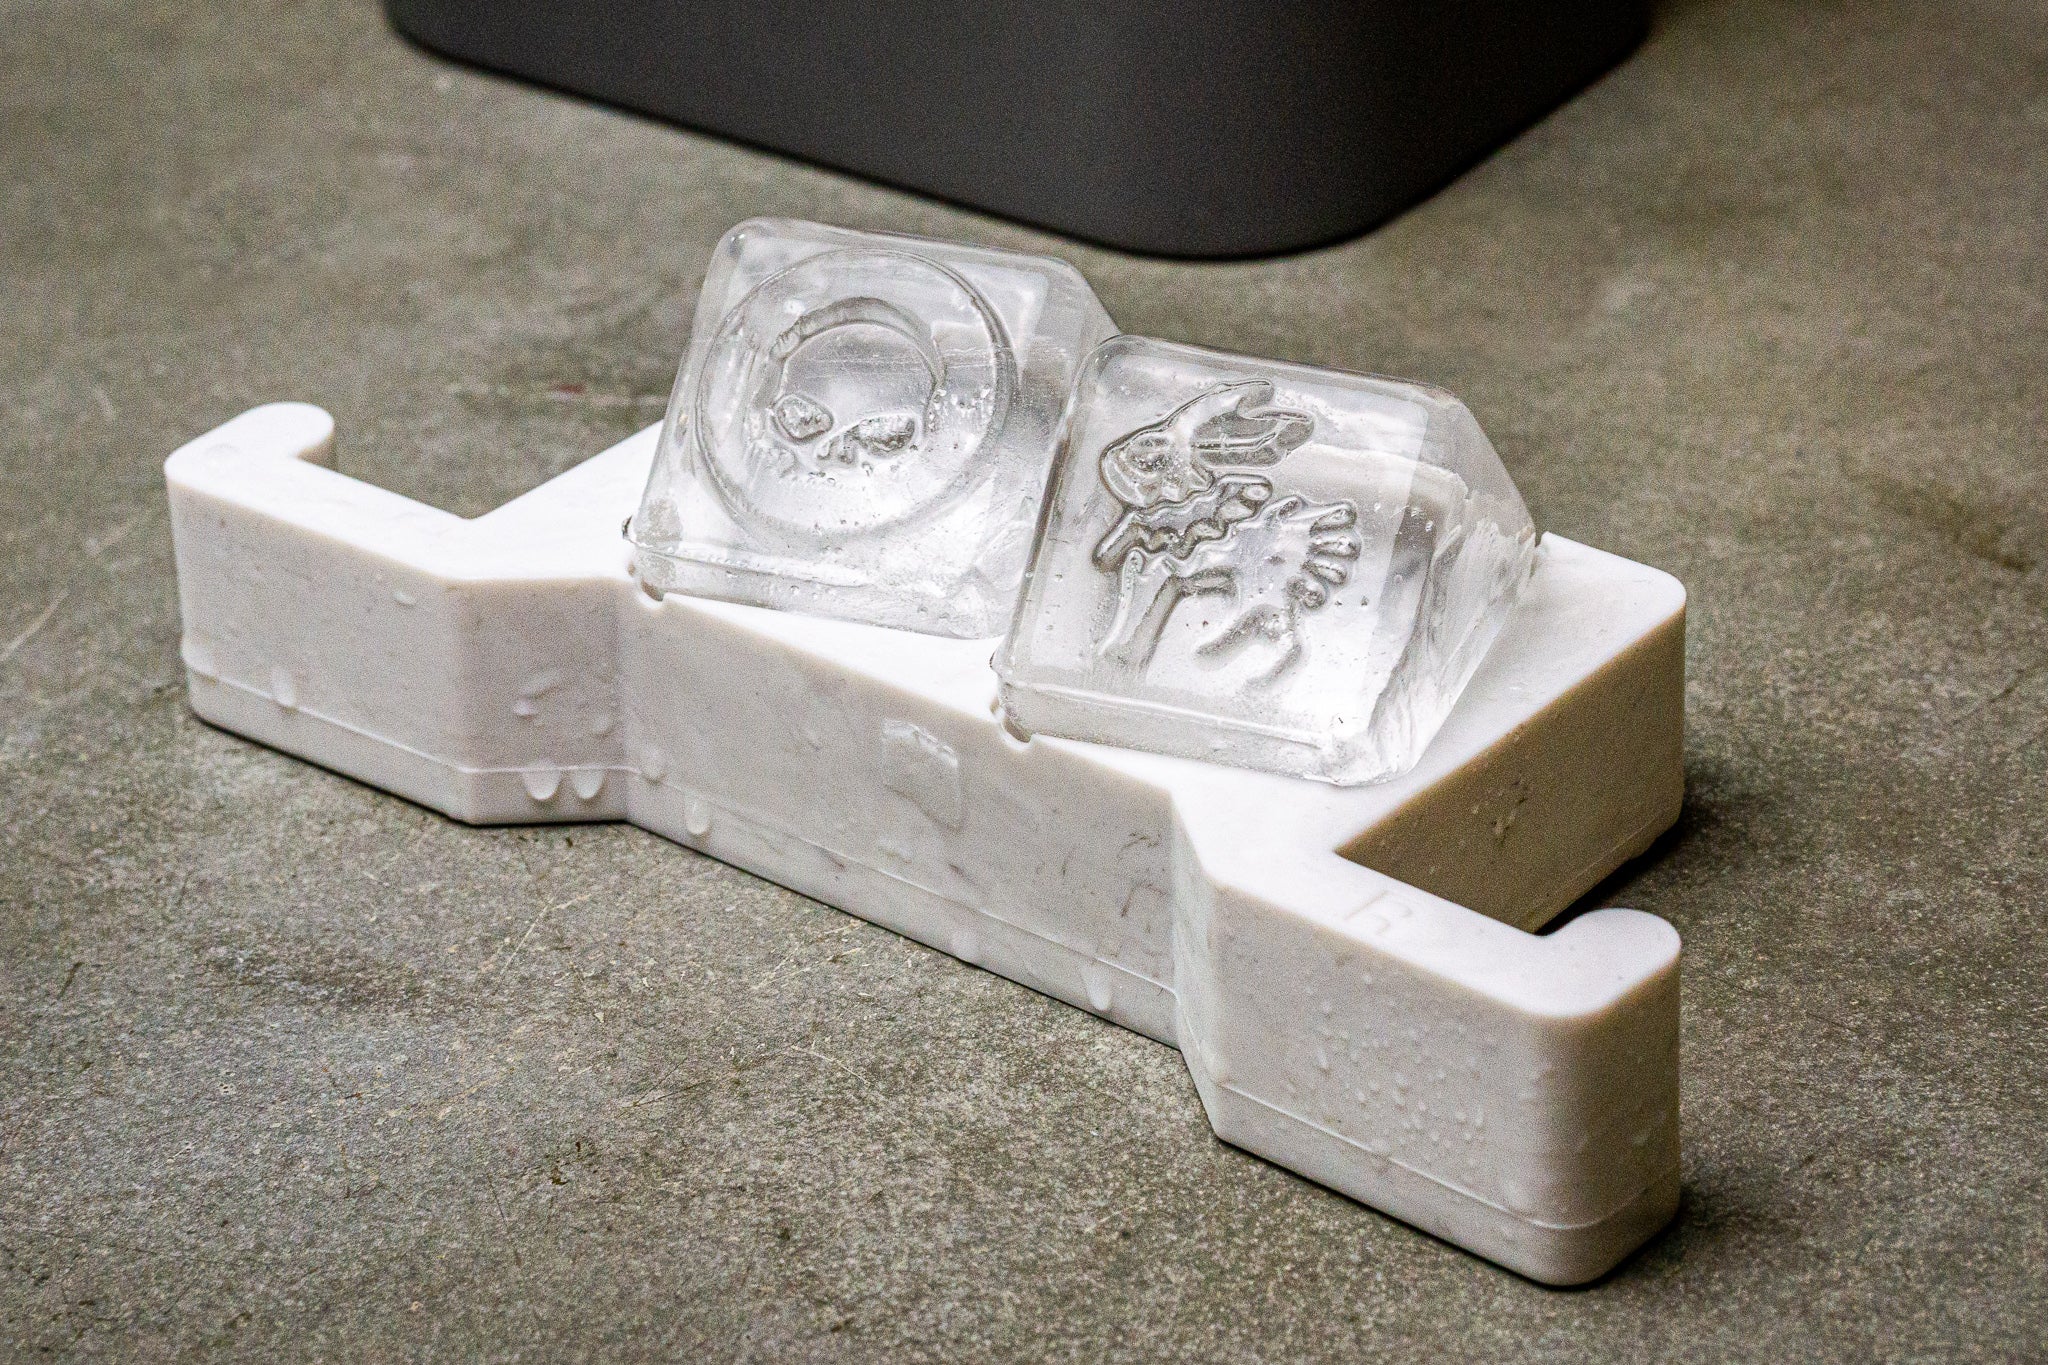 Review: Siligrams Personalized Ice Molds - Drinkhacker